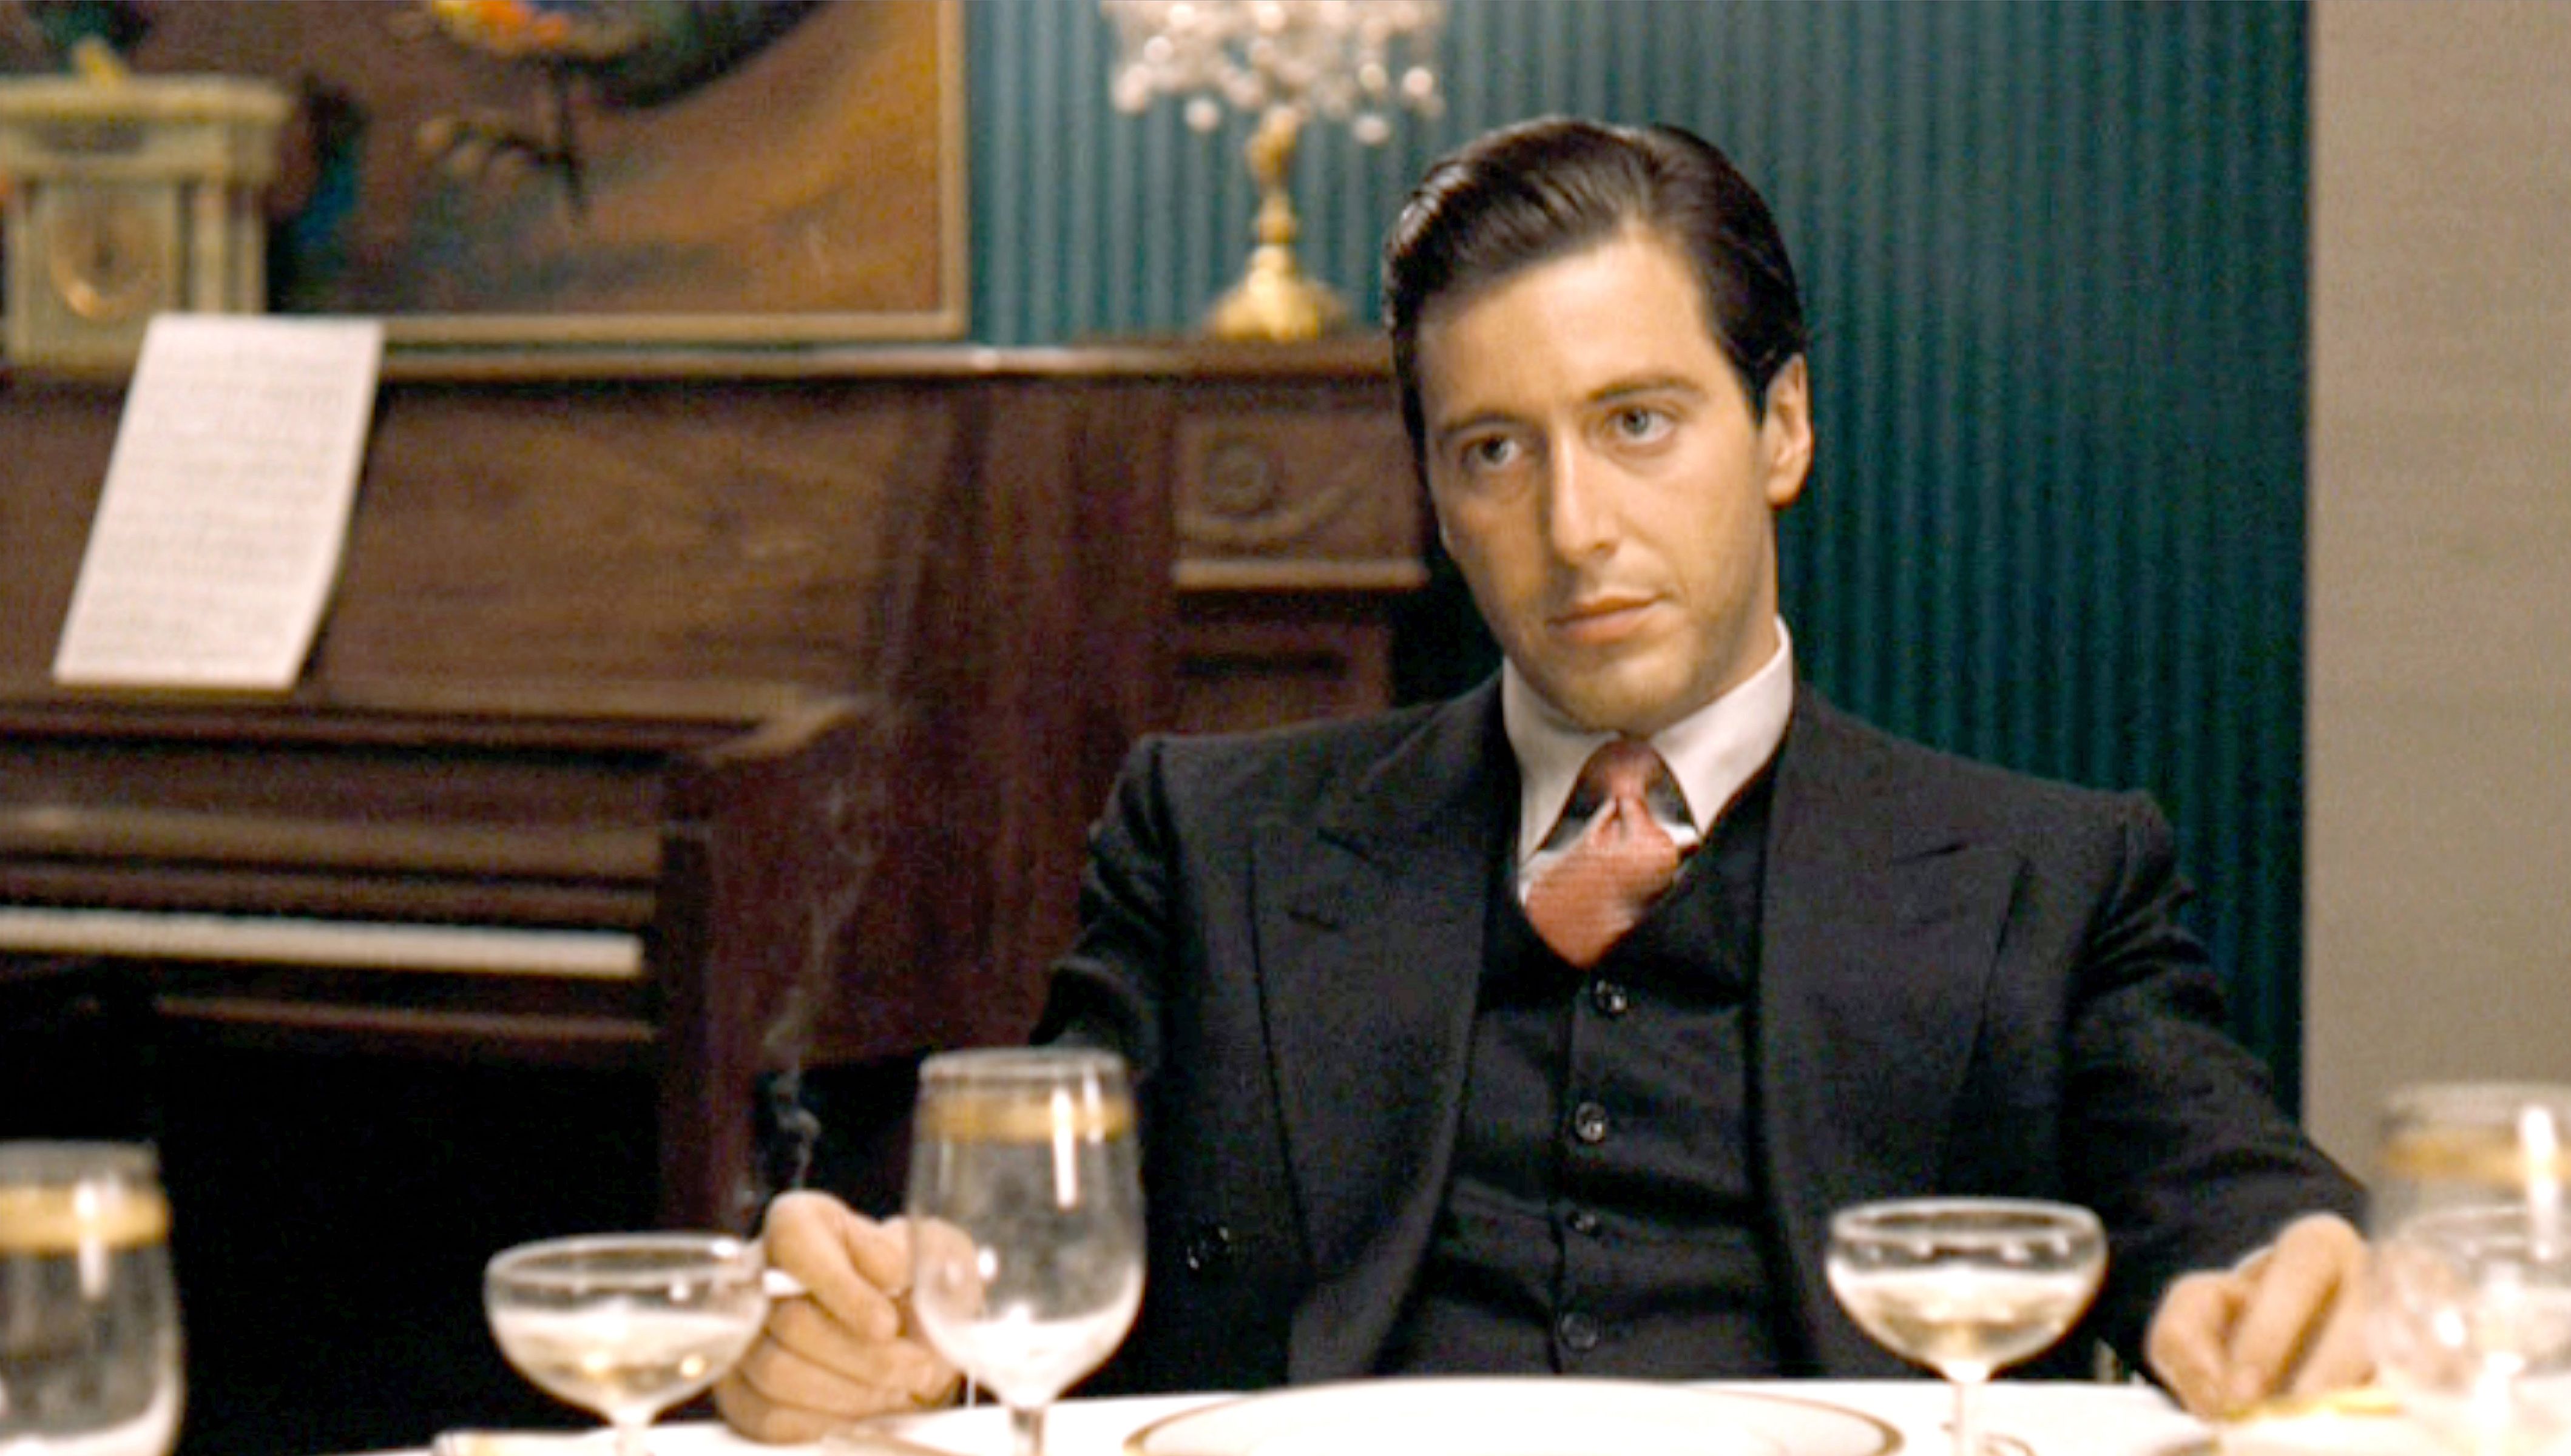 Al Pacino in The Godfather.